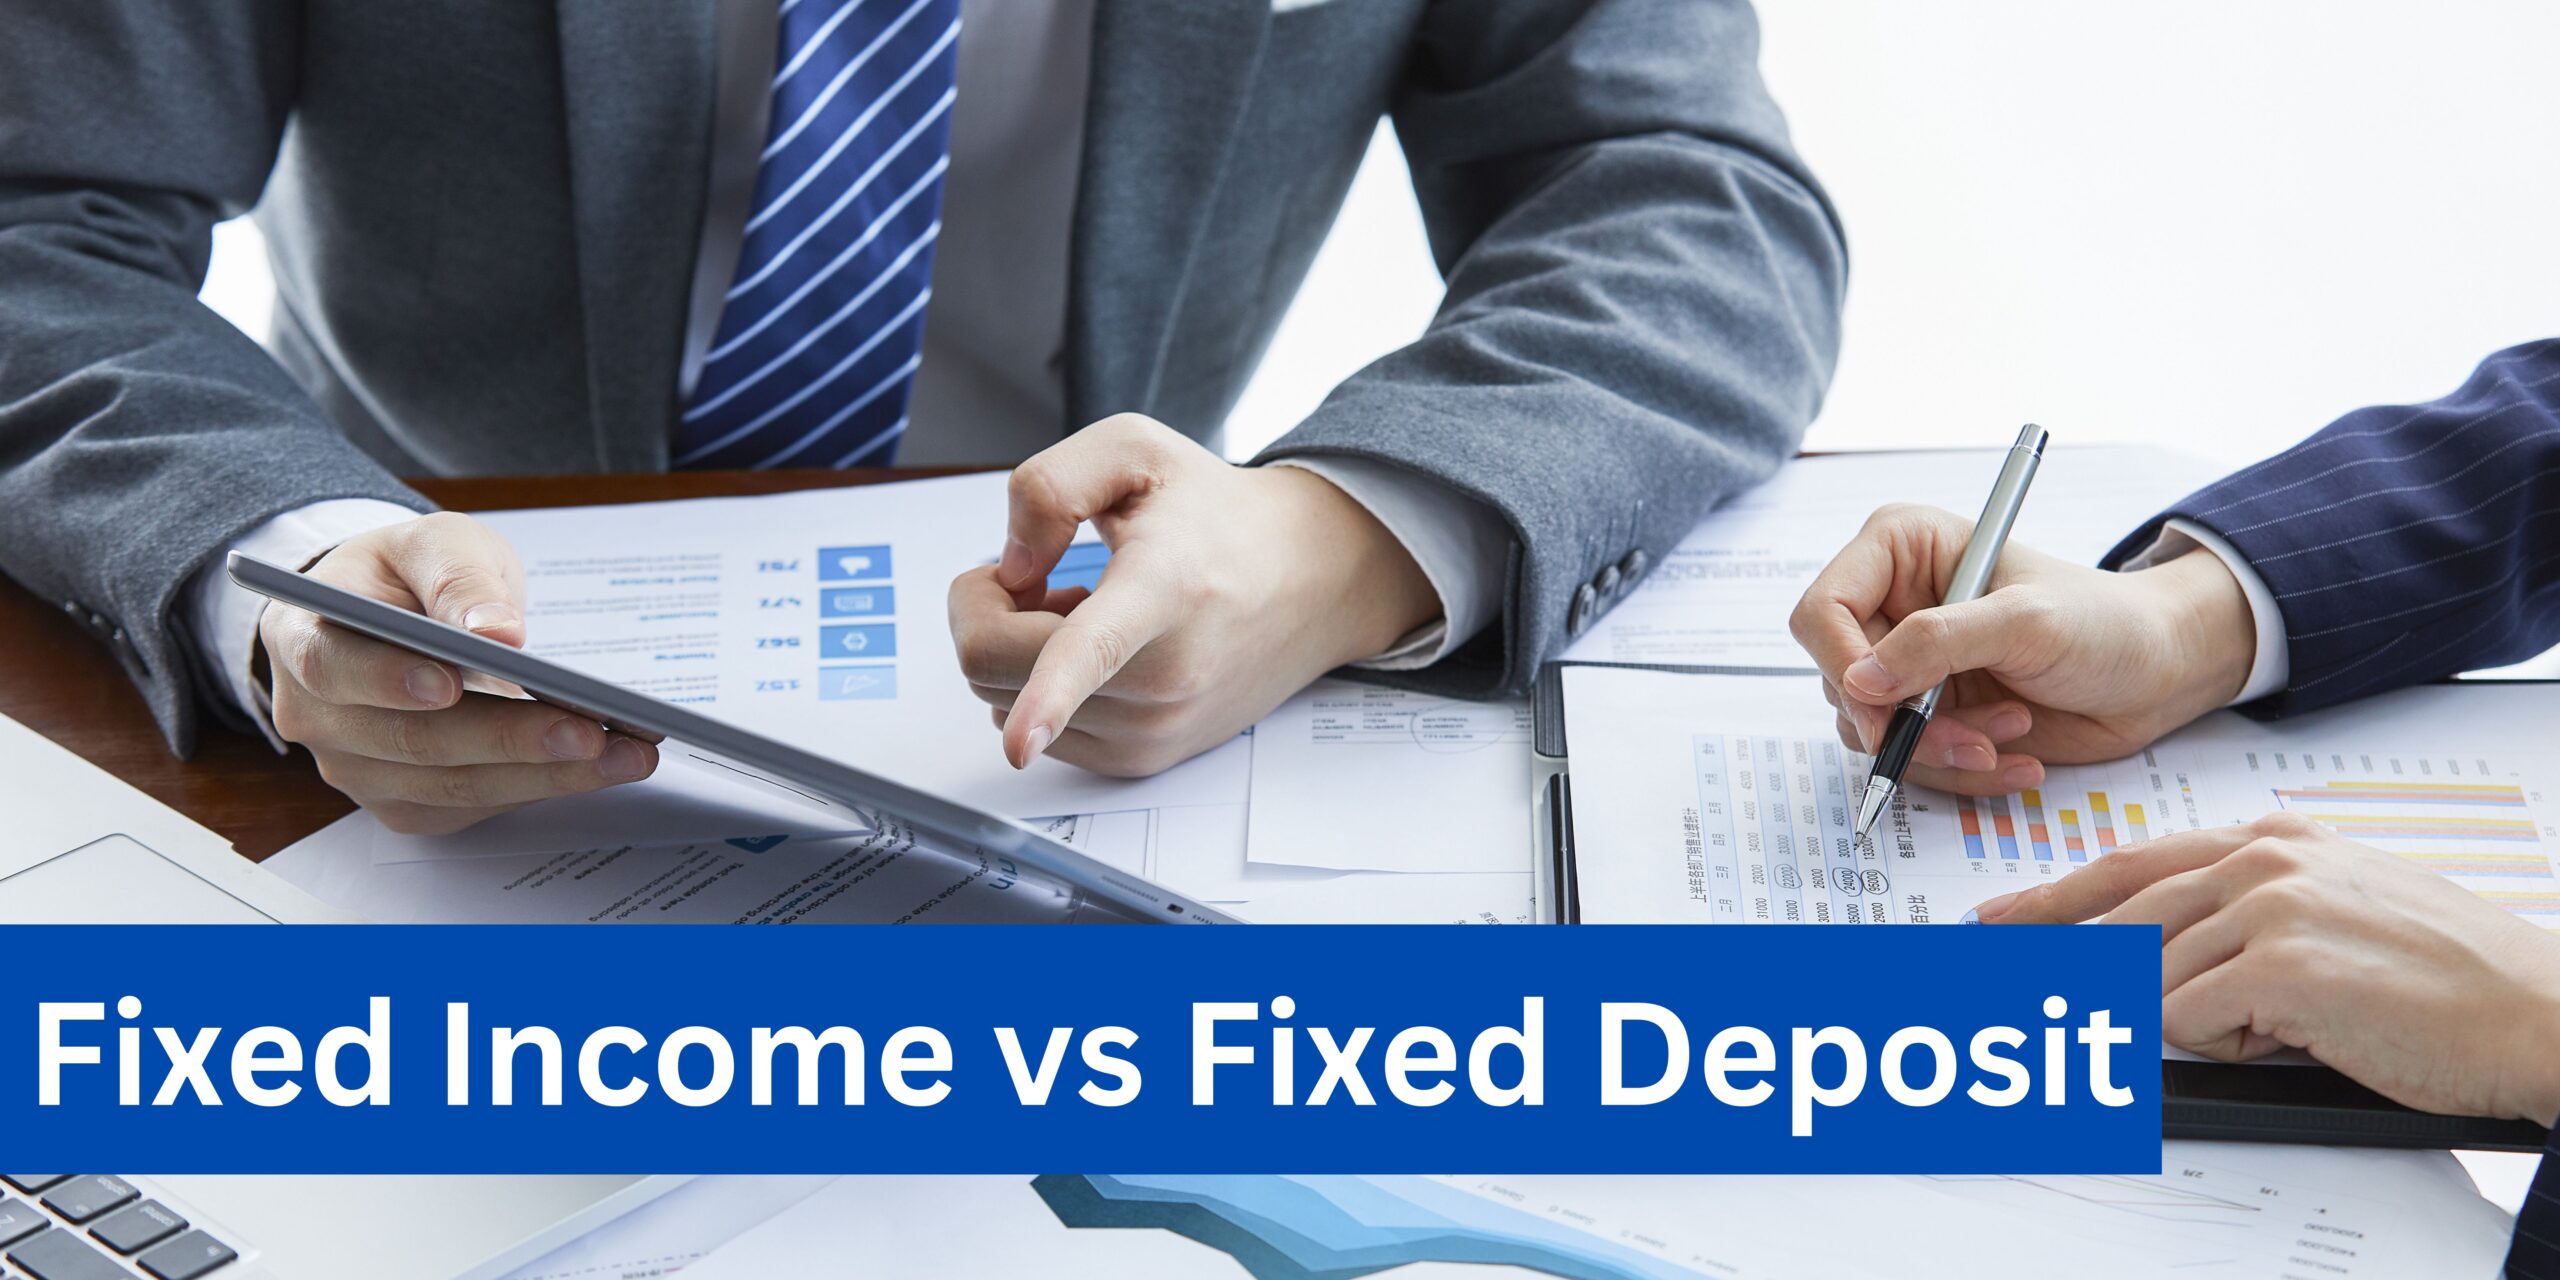 Fixed Income vs. Fixed Deposit: What’s the Better Investment Option?